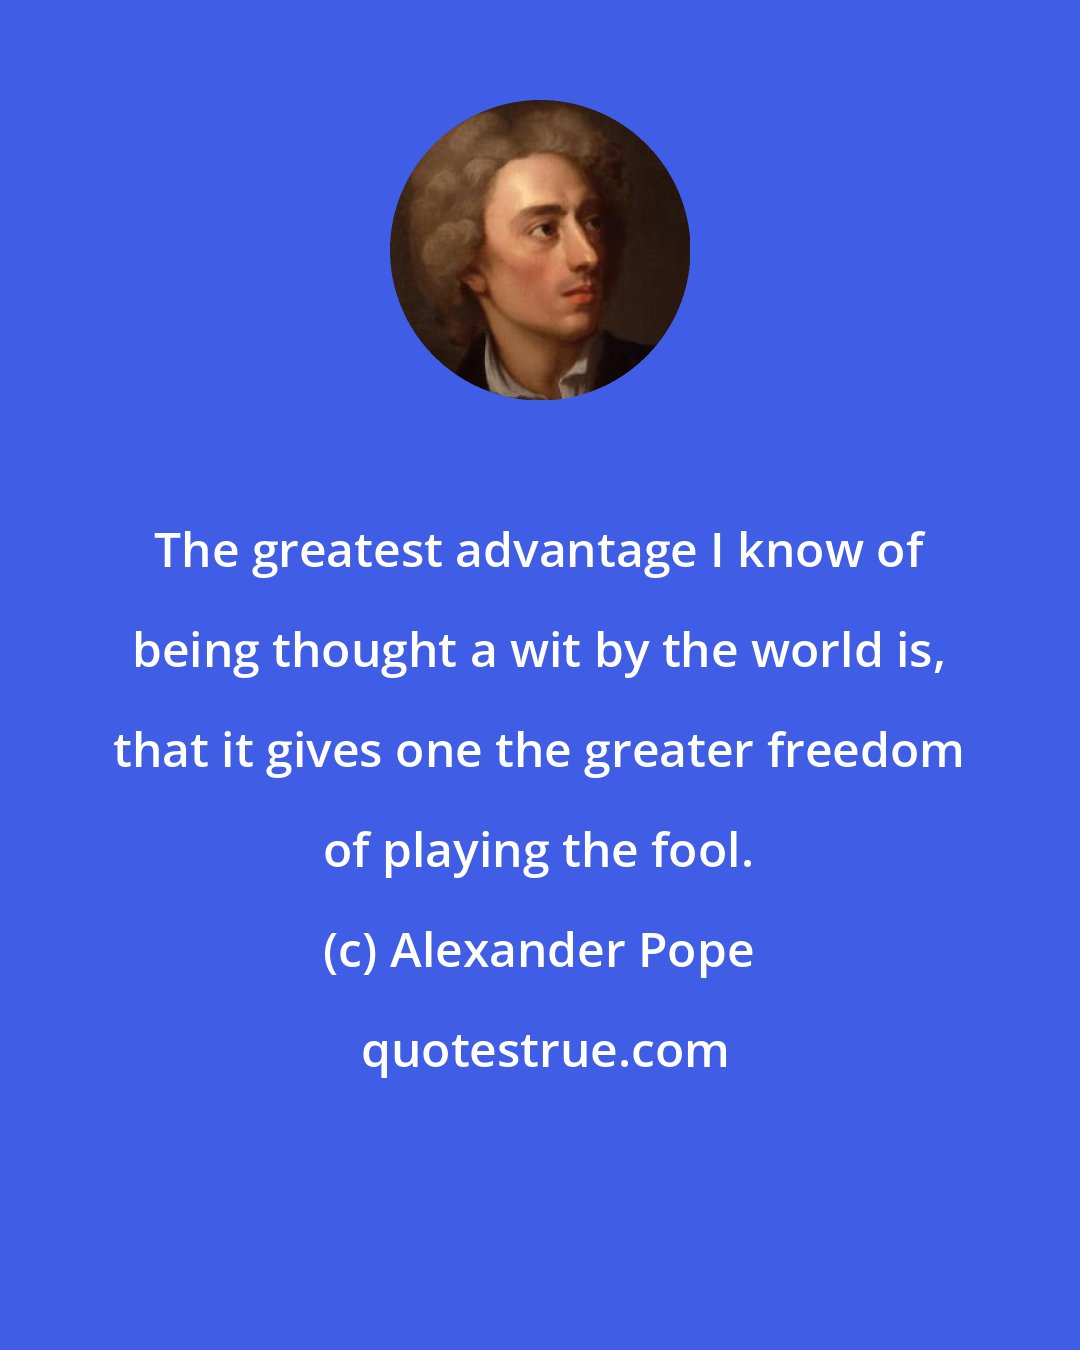 Alexander Pope: The greatest advantage I know of being thought a wit by the world is, that it gives one the greater freedom of playing the fool.